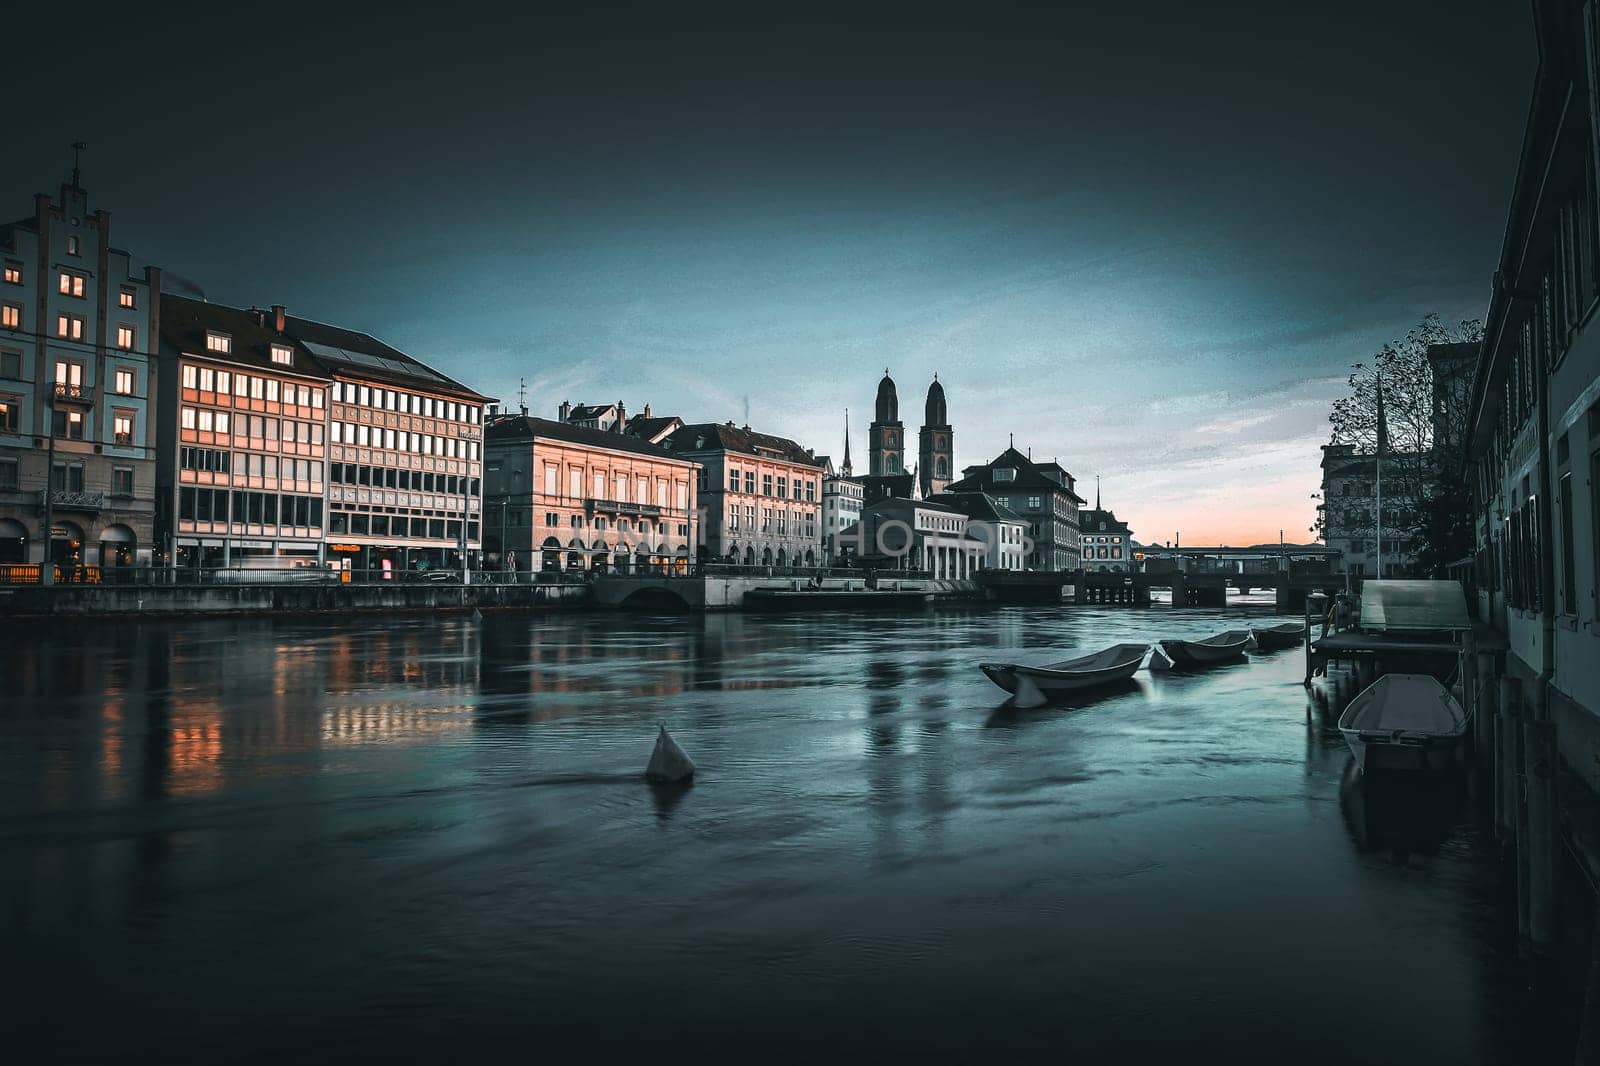 View of the River Limmat with boats on the water and the old town of Zurich. High quality photo